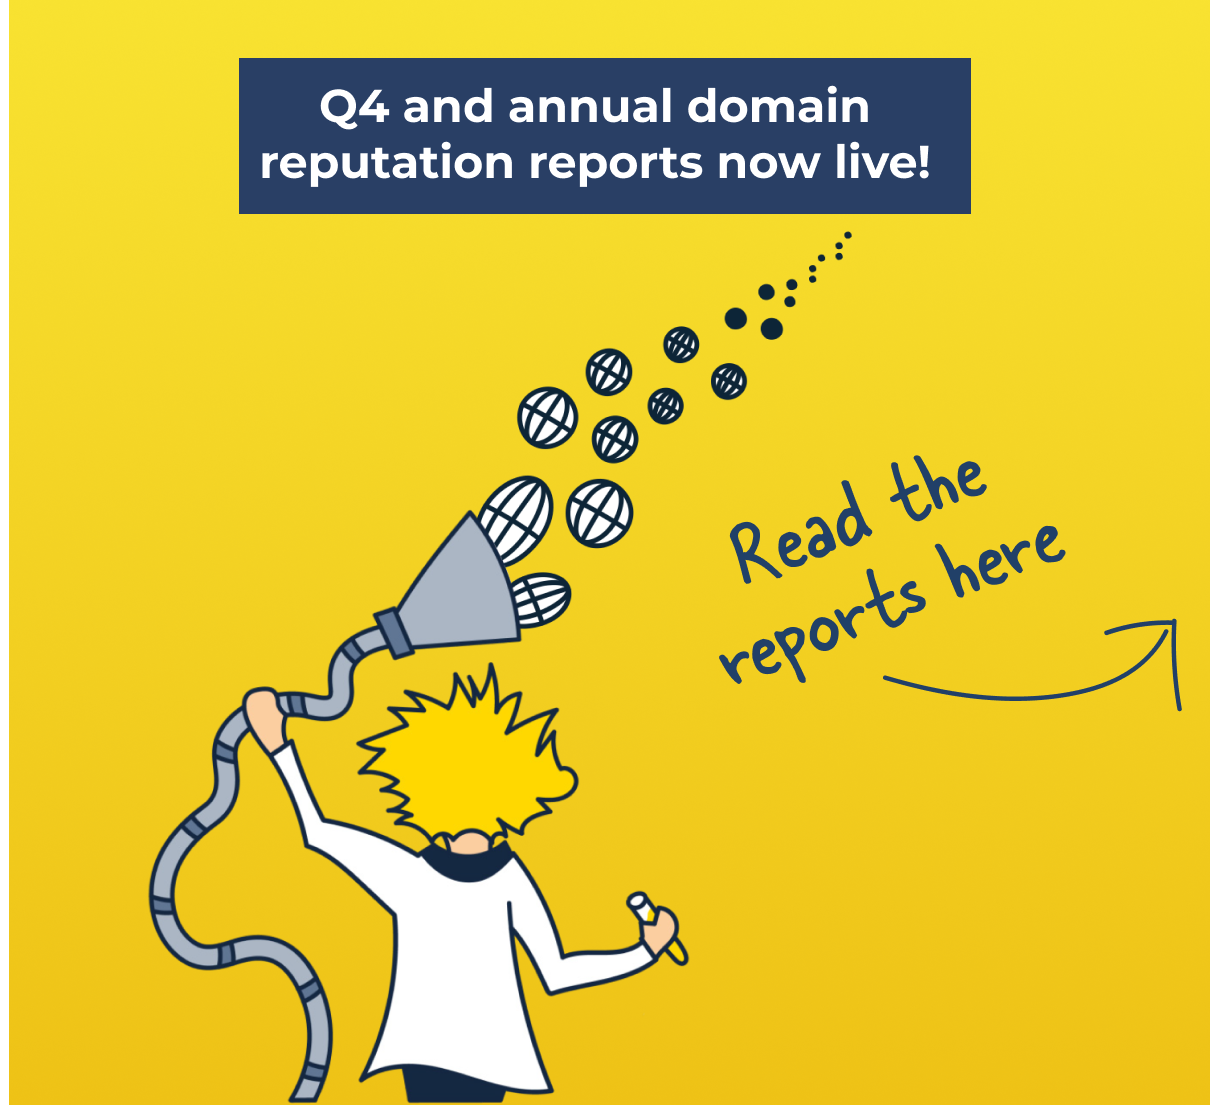 Q4 and annual domain reputation reports